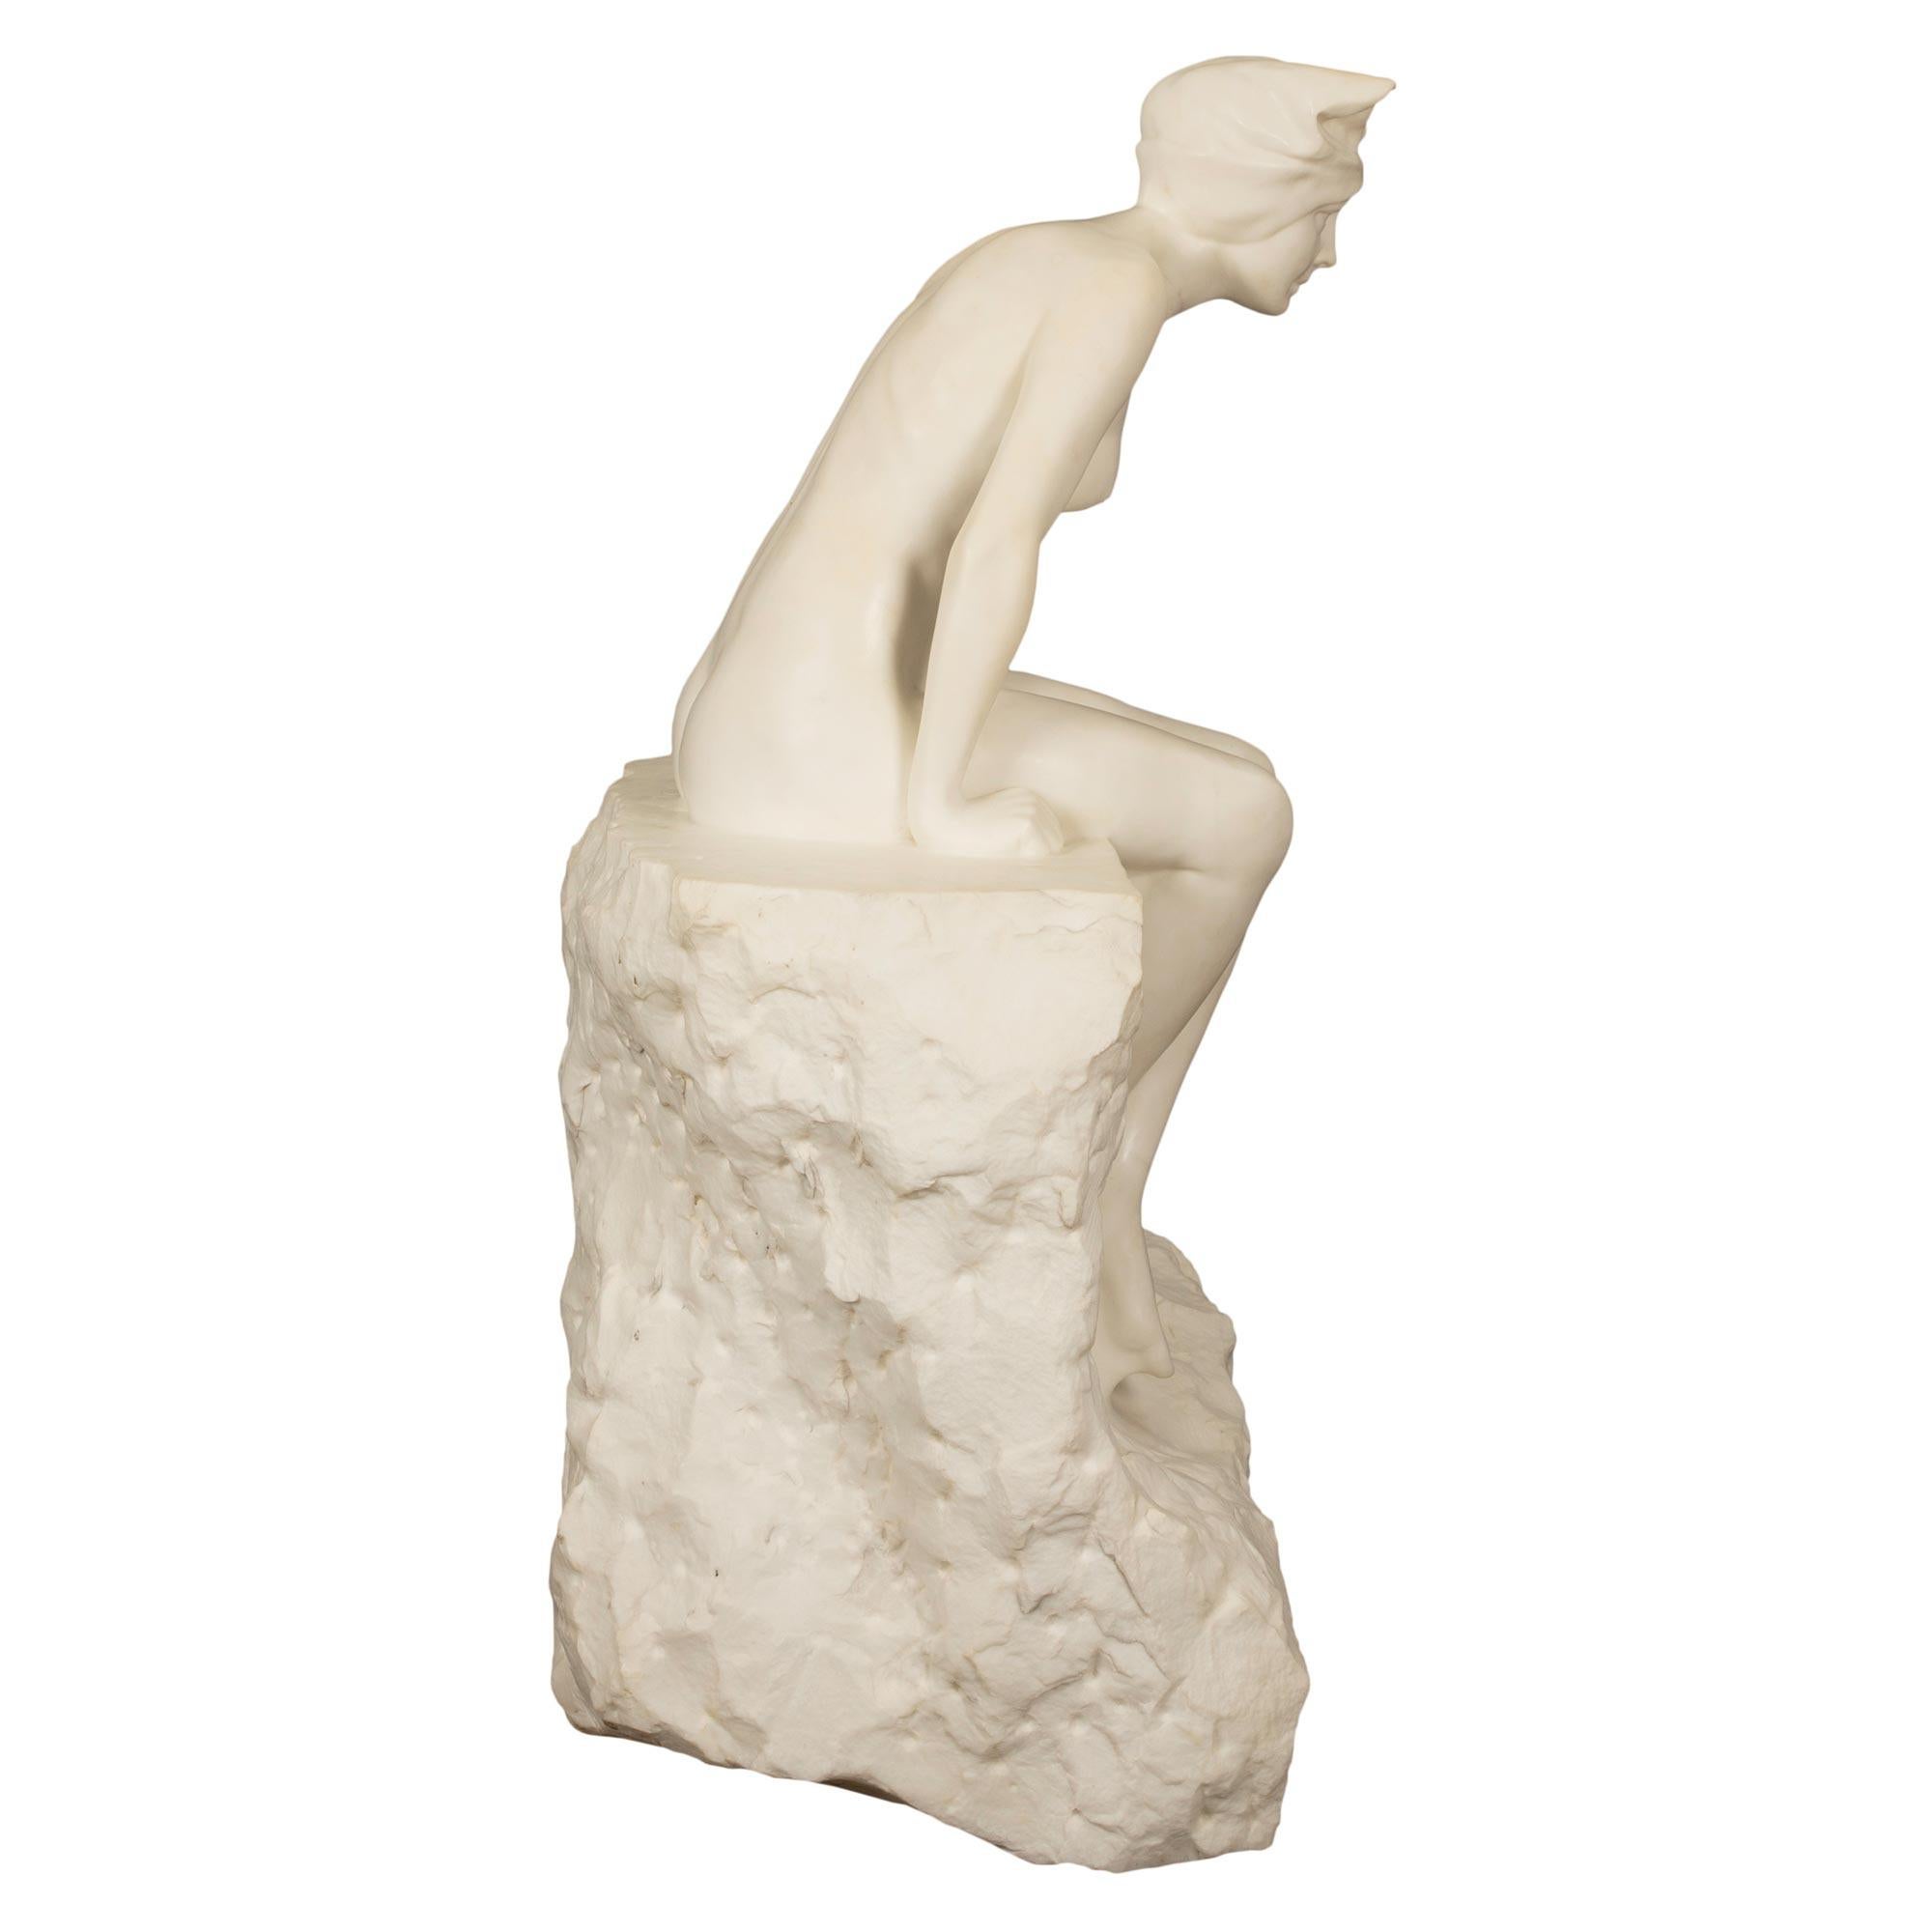 Italian 19th Century White Carrara Marble Statue of a Maiden Sitting on a Rock In Good Condition For Sale In West Palm Beach, FL